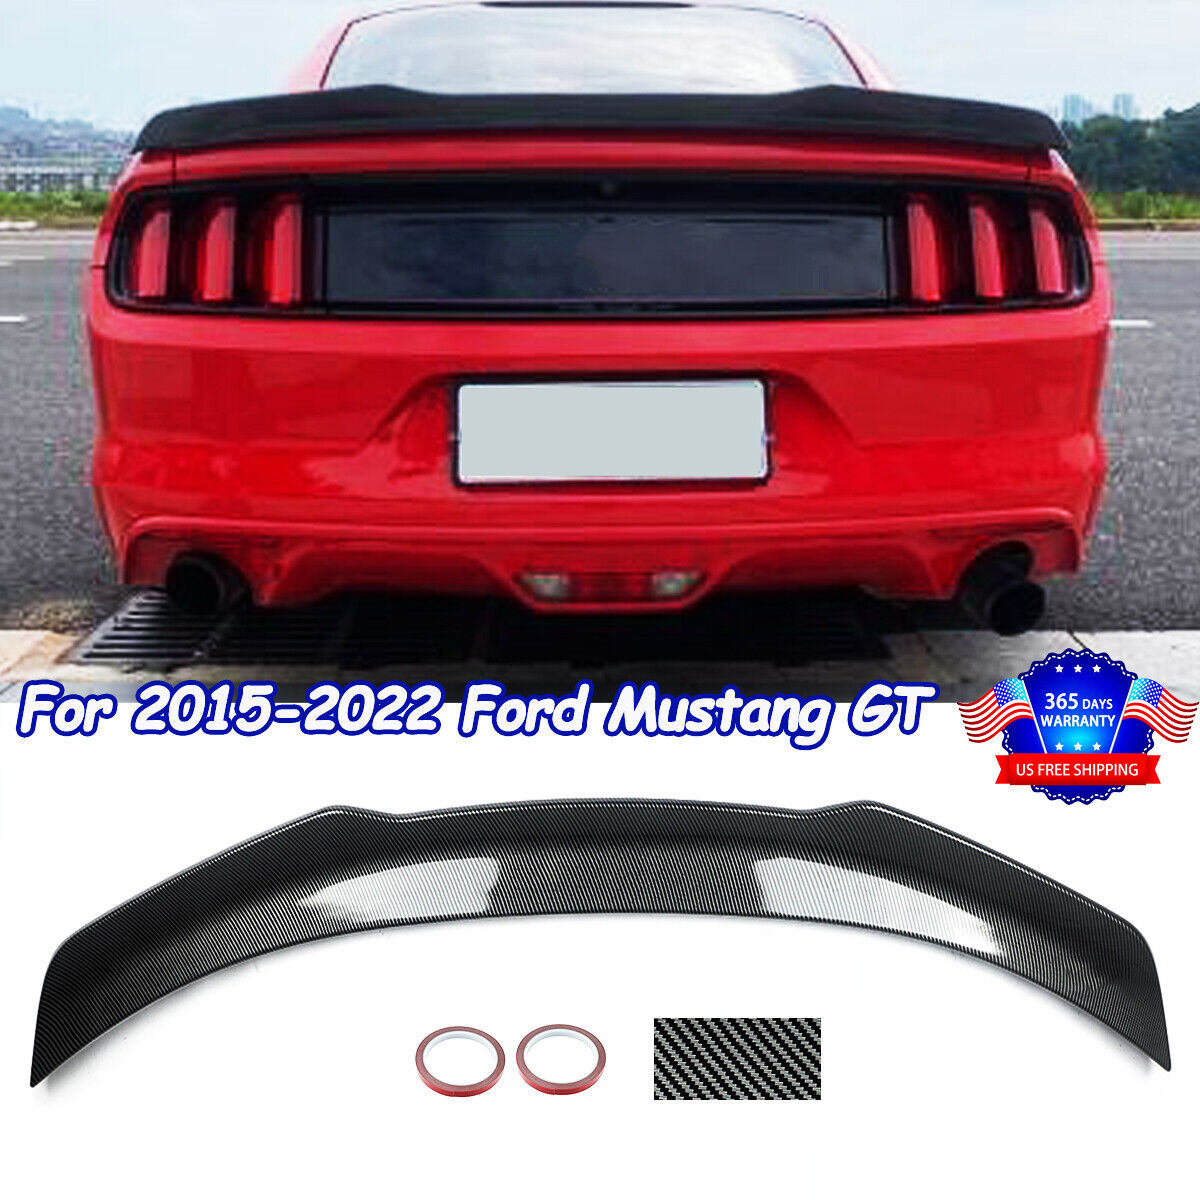 FOR 2015-22 FORD MUSTANG GT CARBON LOOK ABS H STYLE HIGHKICK TRUNK SPOILER WING